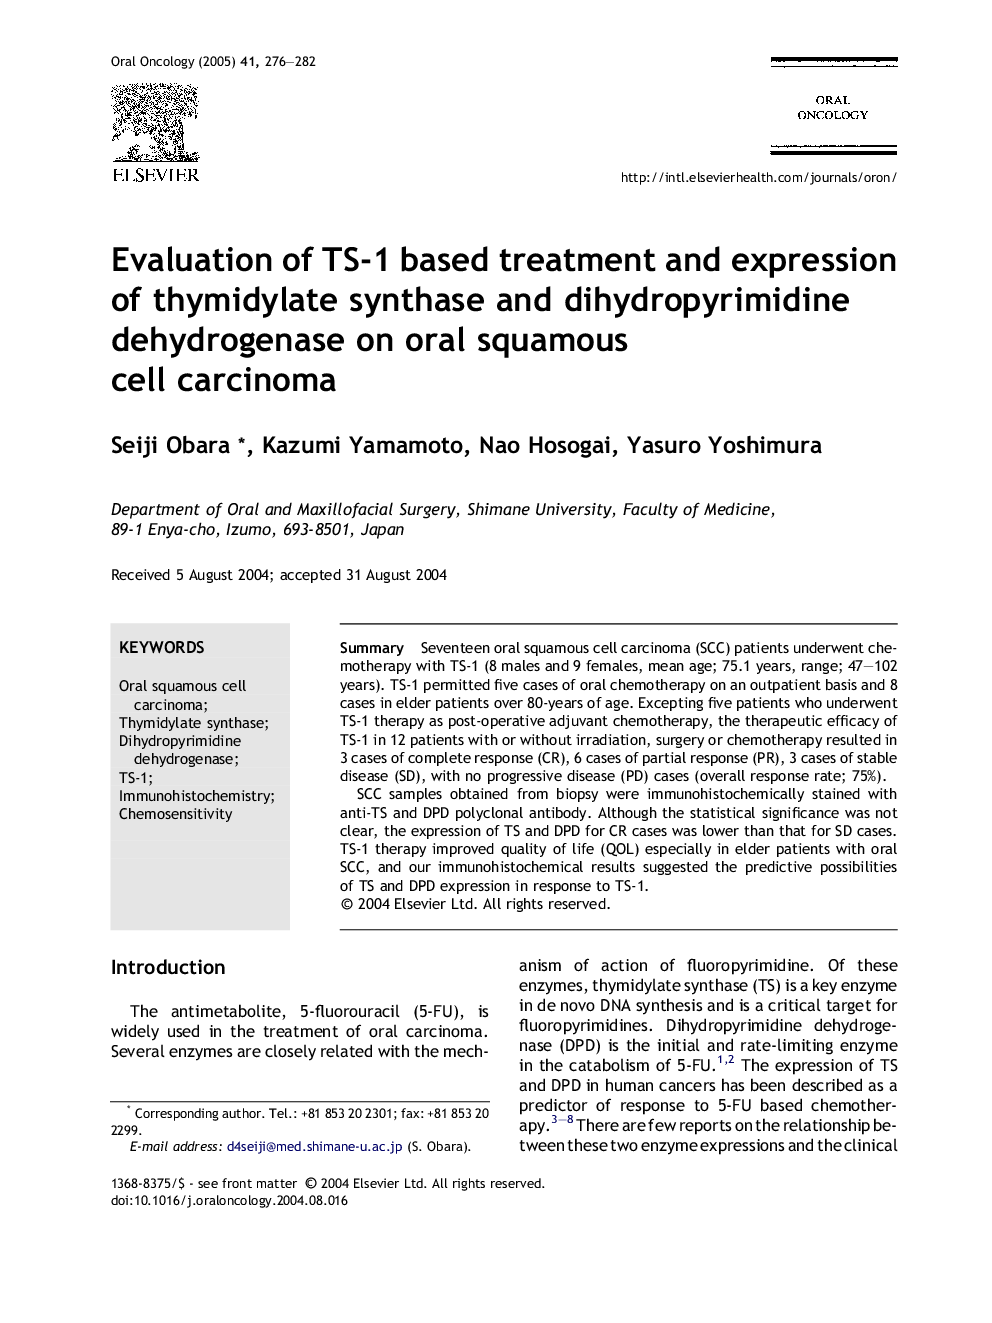 Evaluation of TS-1 based treatment and expression of thymidylate synthase and dihydropyrimidine dehydrogenase on oral squamous cell carcinoma